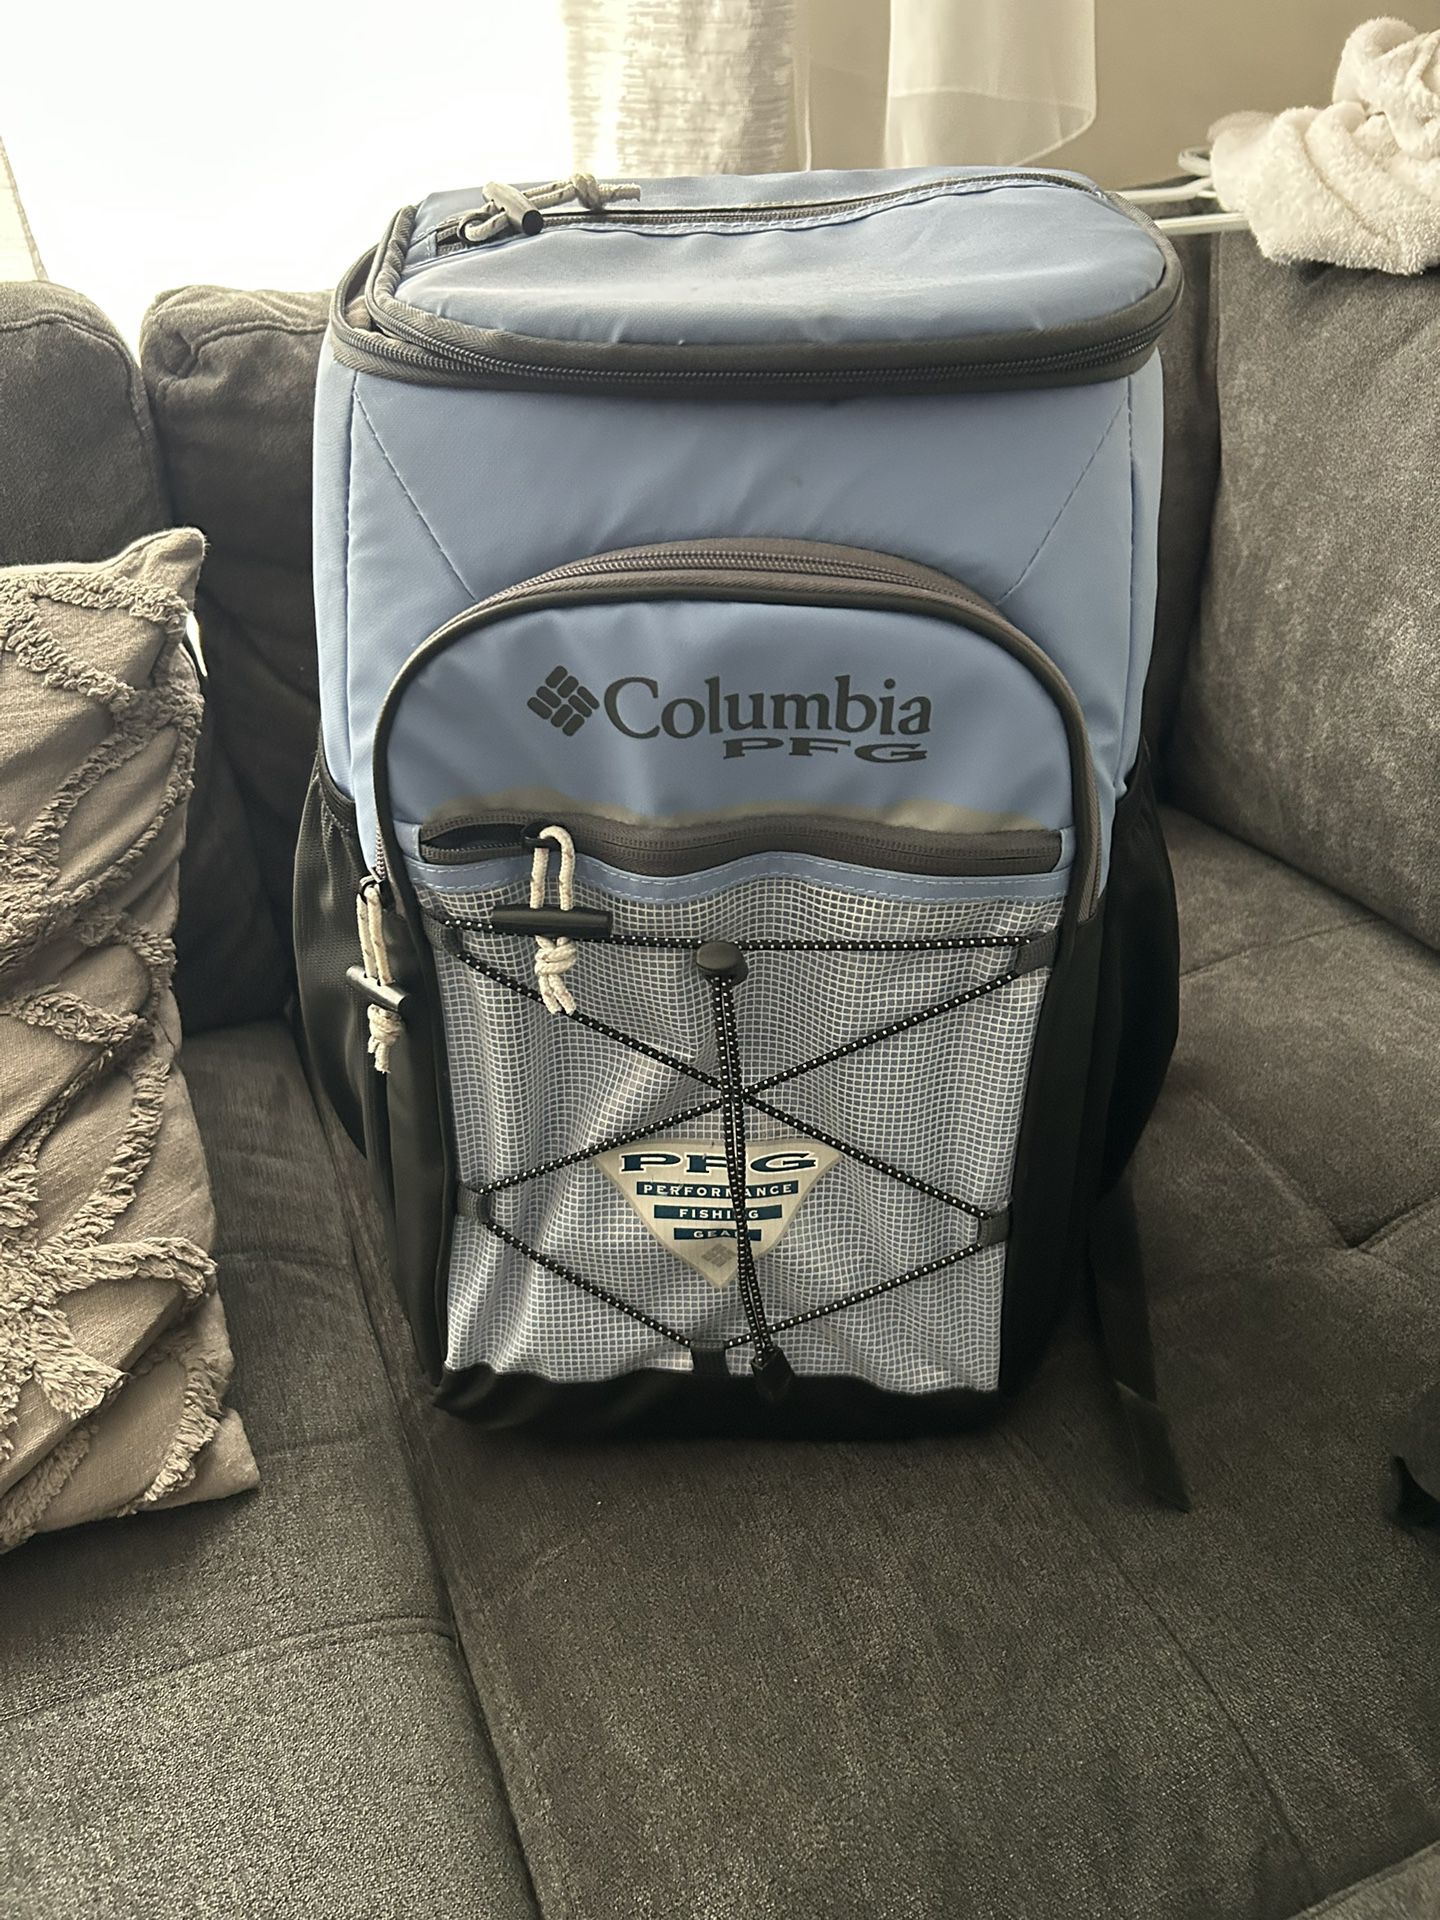 Columbia PFG Backpack for Sale in Bakersfield, CA - OfferUp